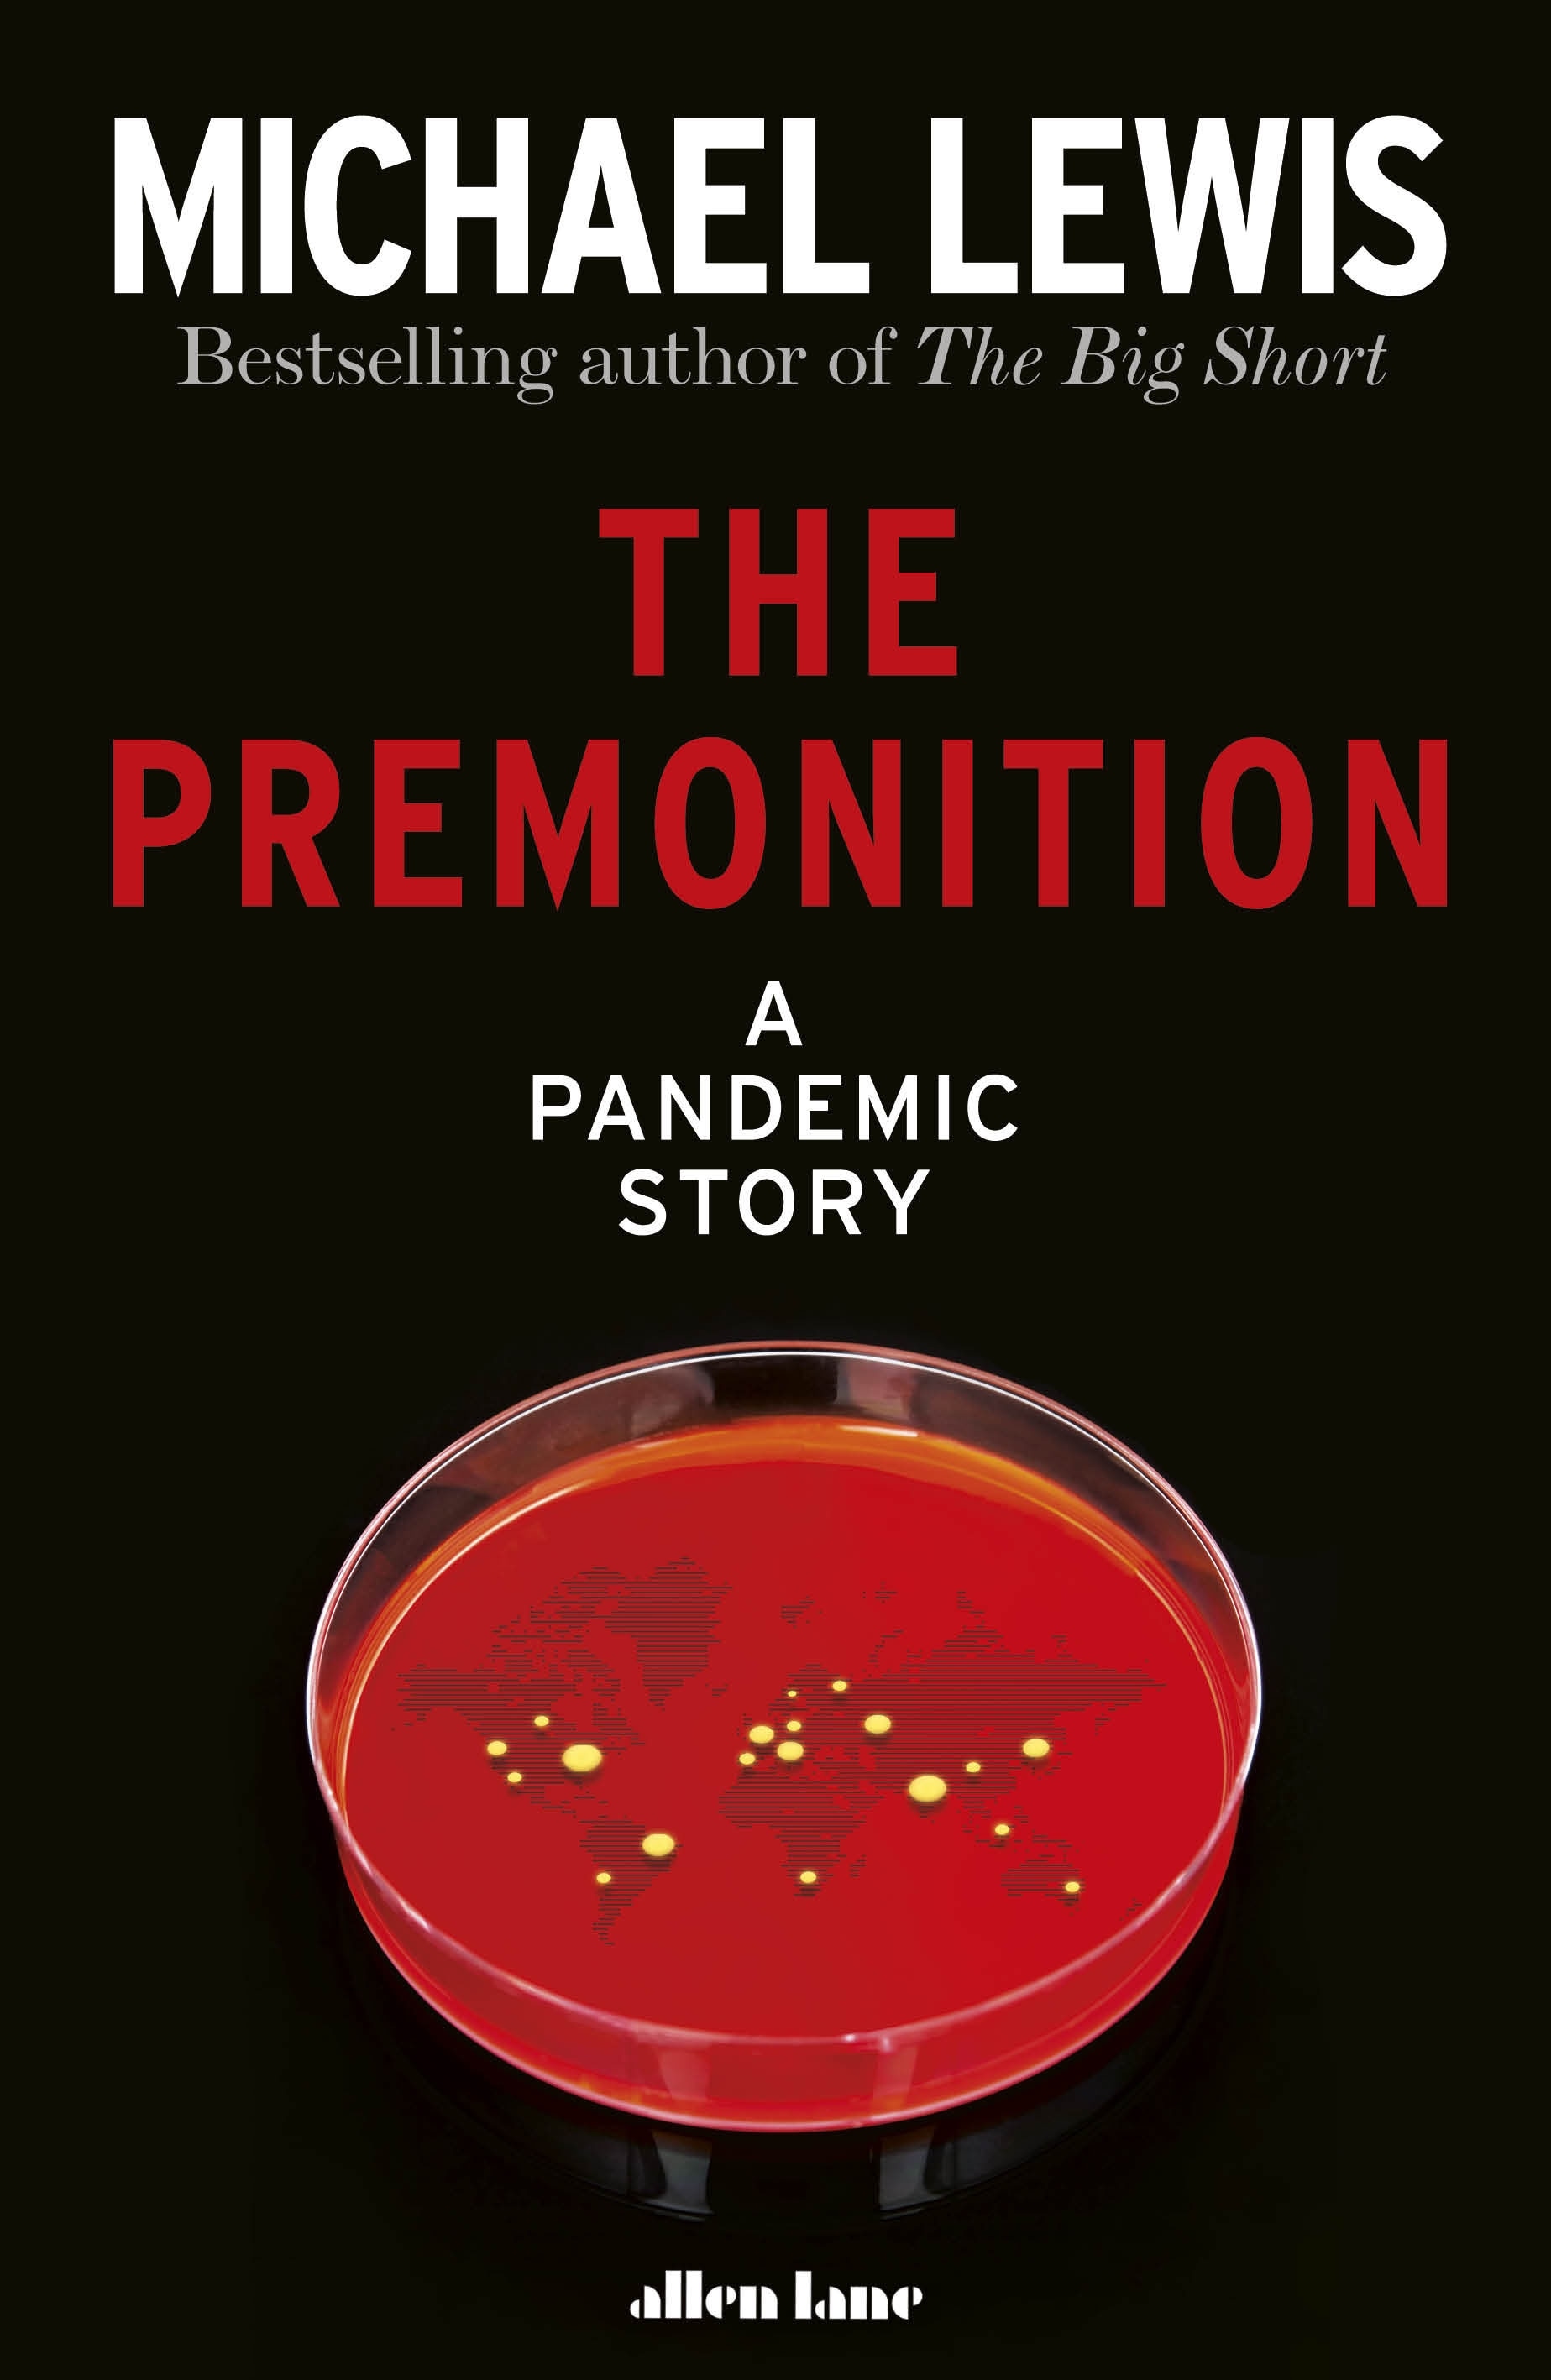 Book “The Premonition” by Michael Lewis — May 4, 2021